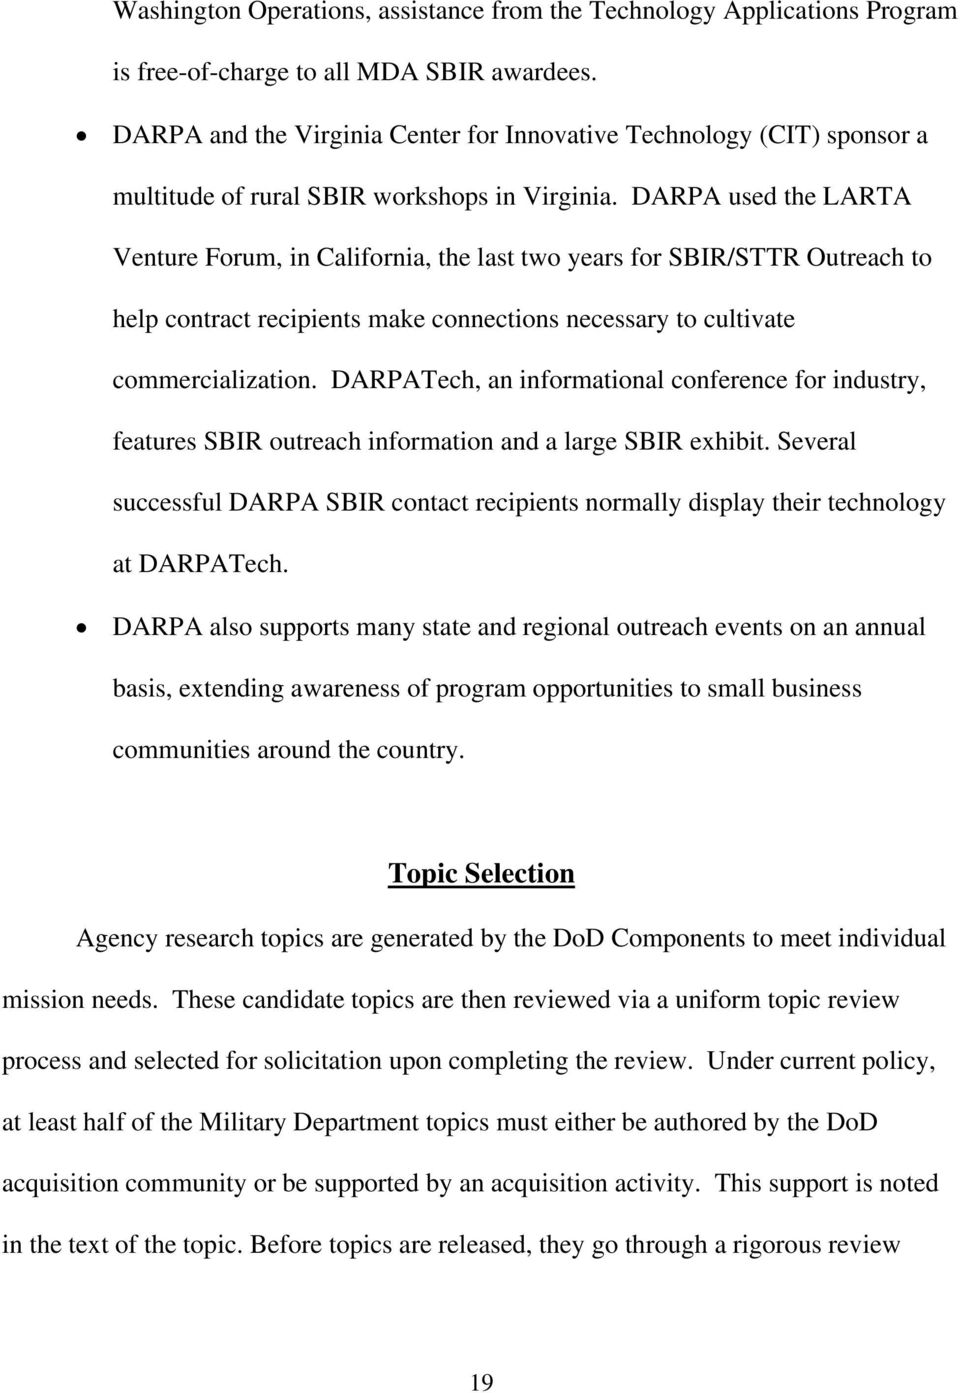 DARPA used the LARTA Venture Forum, in California, the last two years for SBIR/STTR Outreach to help contract recipients make connections necessary to cultivate commercialization.